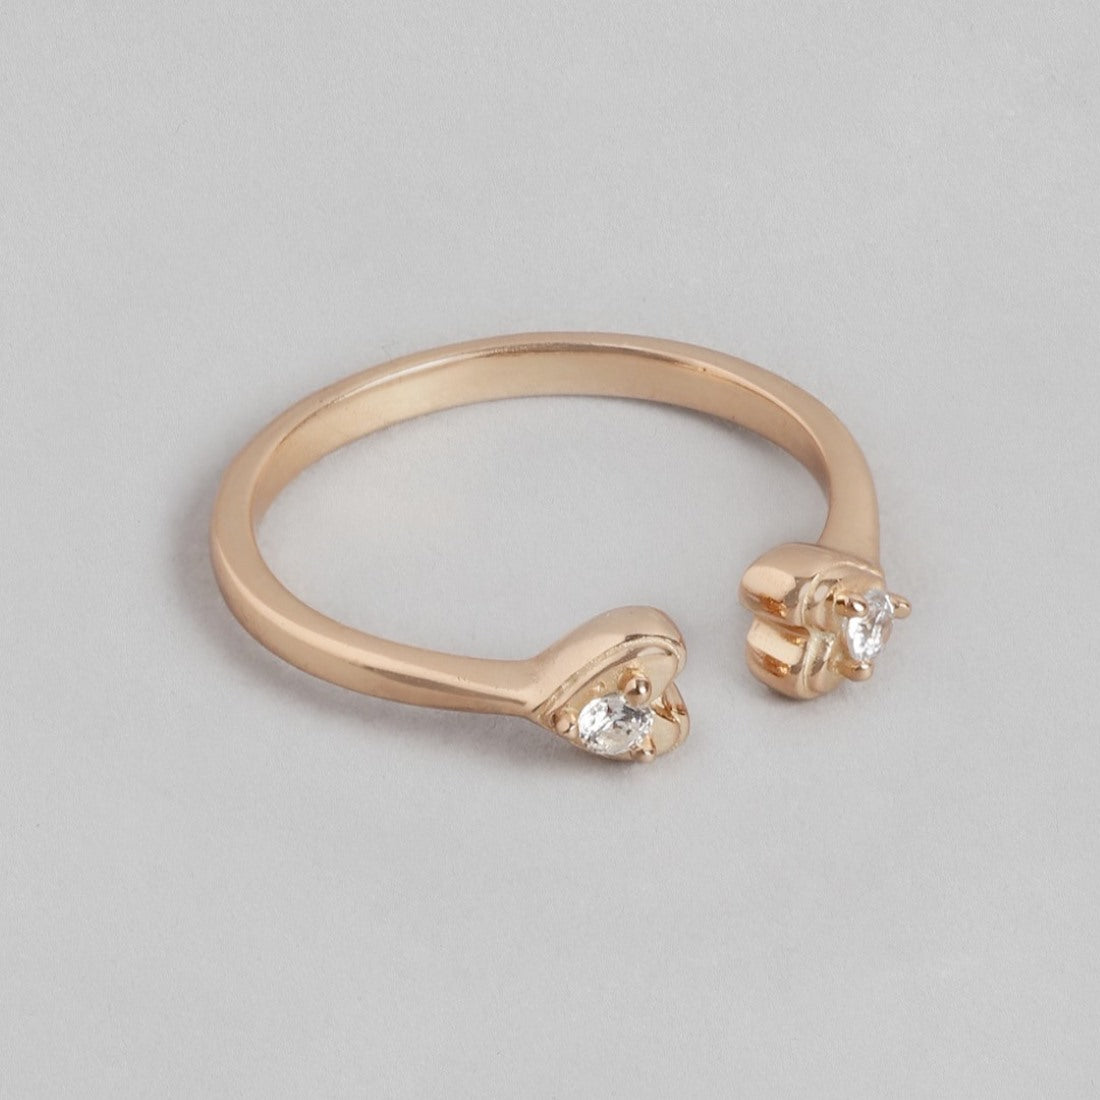 Rosy Affection Rose Gold-Plated 925 Sterling Silver Women's Ring (Adjustable)